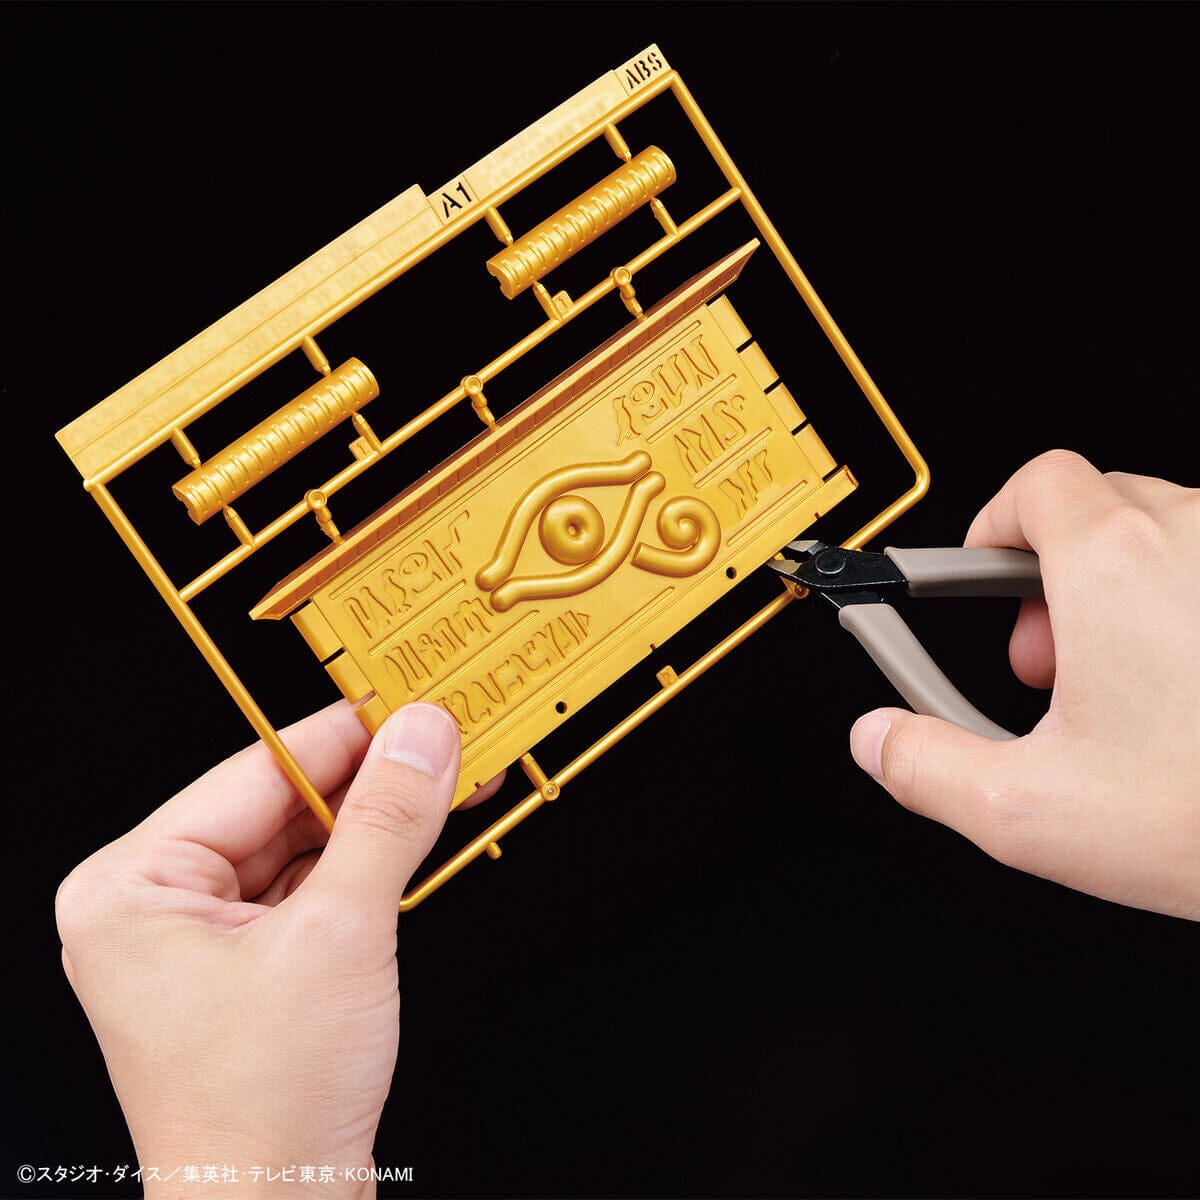 TATE'S Comics + Toys + Videos + More - From Yu-Gi-Oh! Duel Monsters. An  UltimaGear model kit replica of the Millennium Puzzle. To complete the  puzzle, start by assembling the model kit